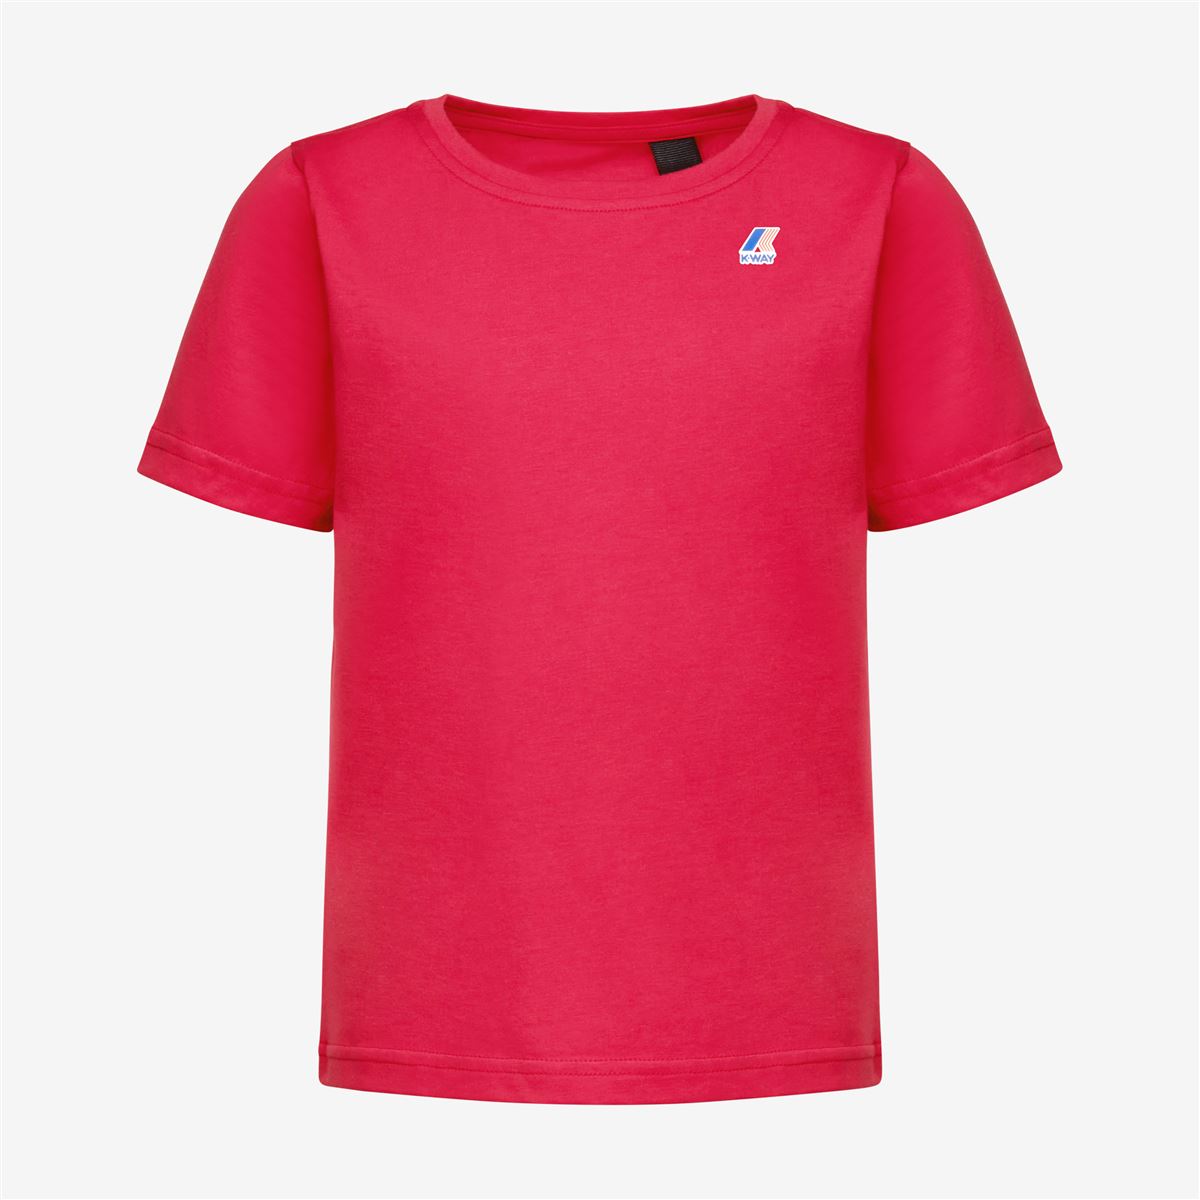 P. LE VRAI 3.0 EDOUARD - T-SHIRTS & TOP - KIDS UNISEX - RED BERRY